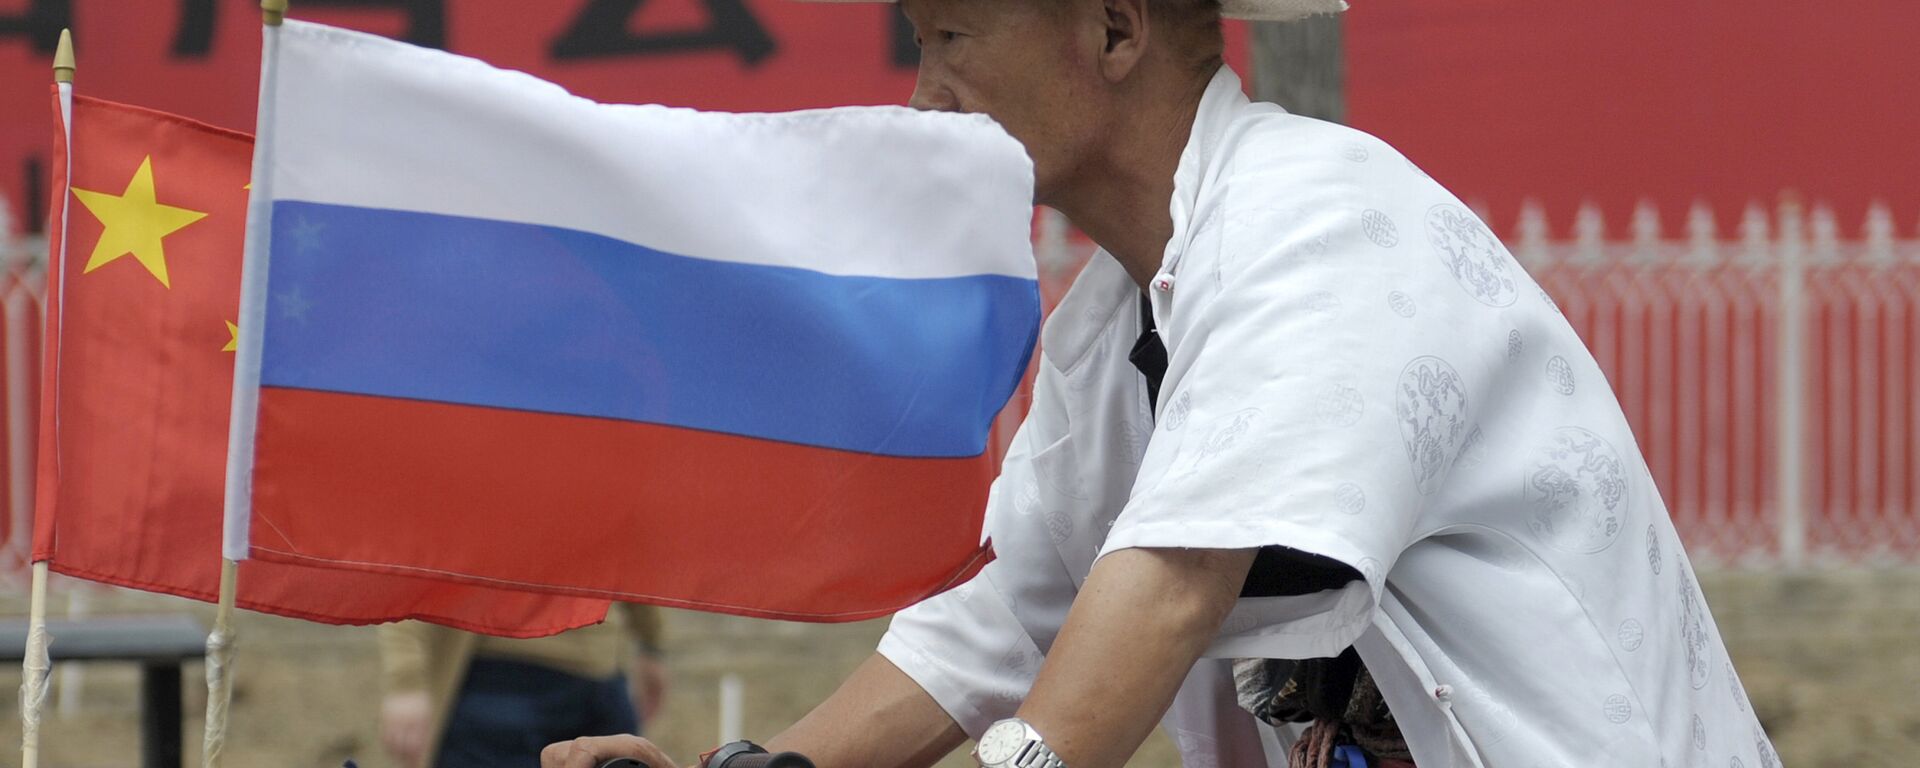 A man rides with a Russian flag displayed on his pedicab in Beijing's Russian trade district of Yabaolu. (File) - Sputnik International, 1920, 20.03.2023